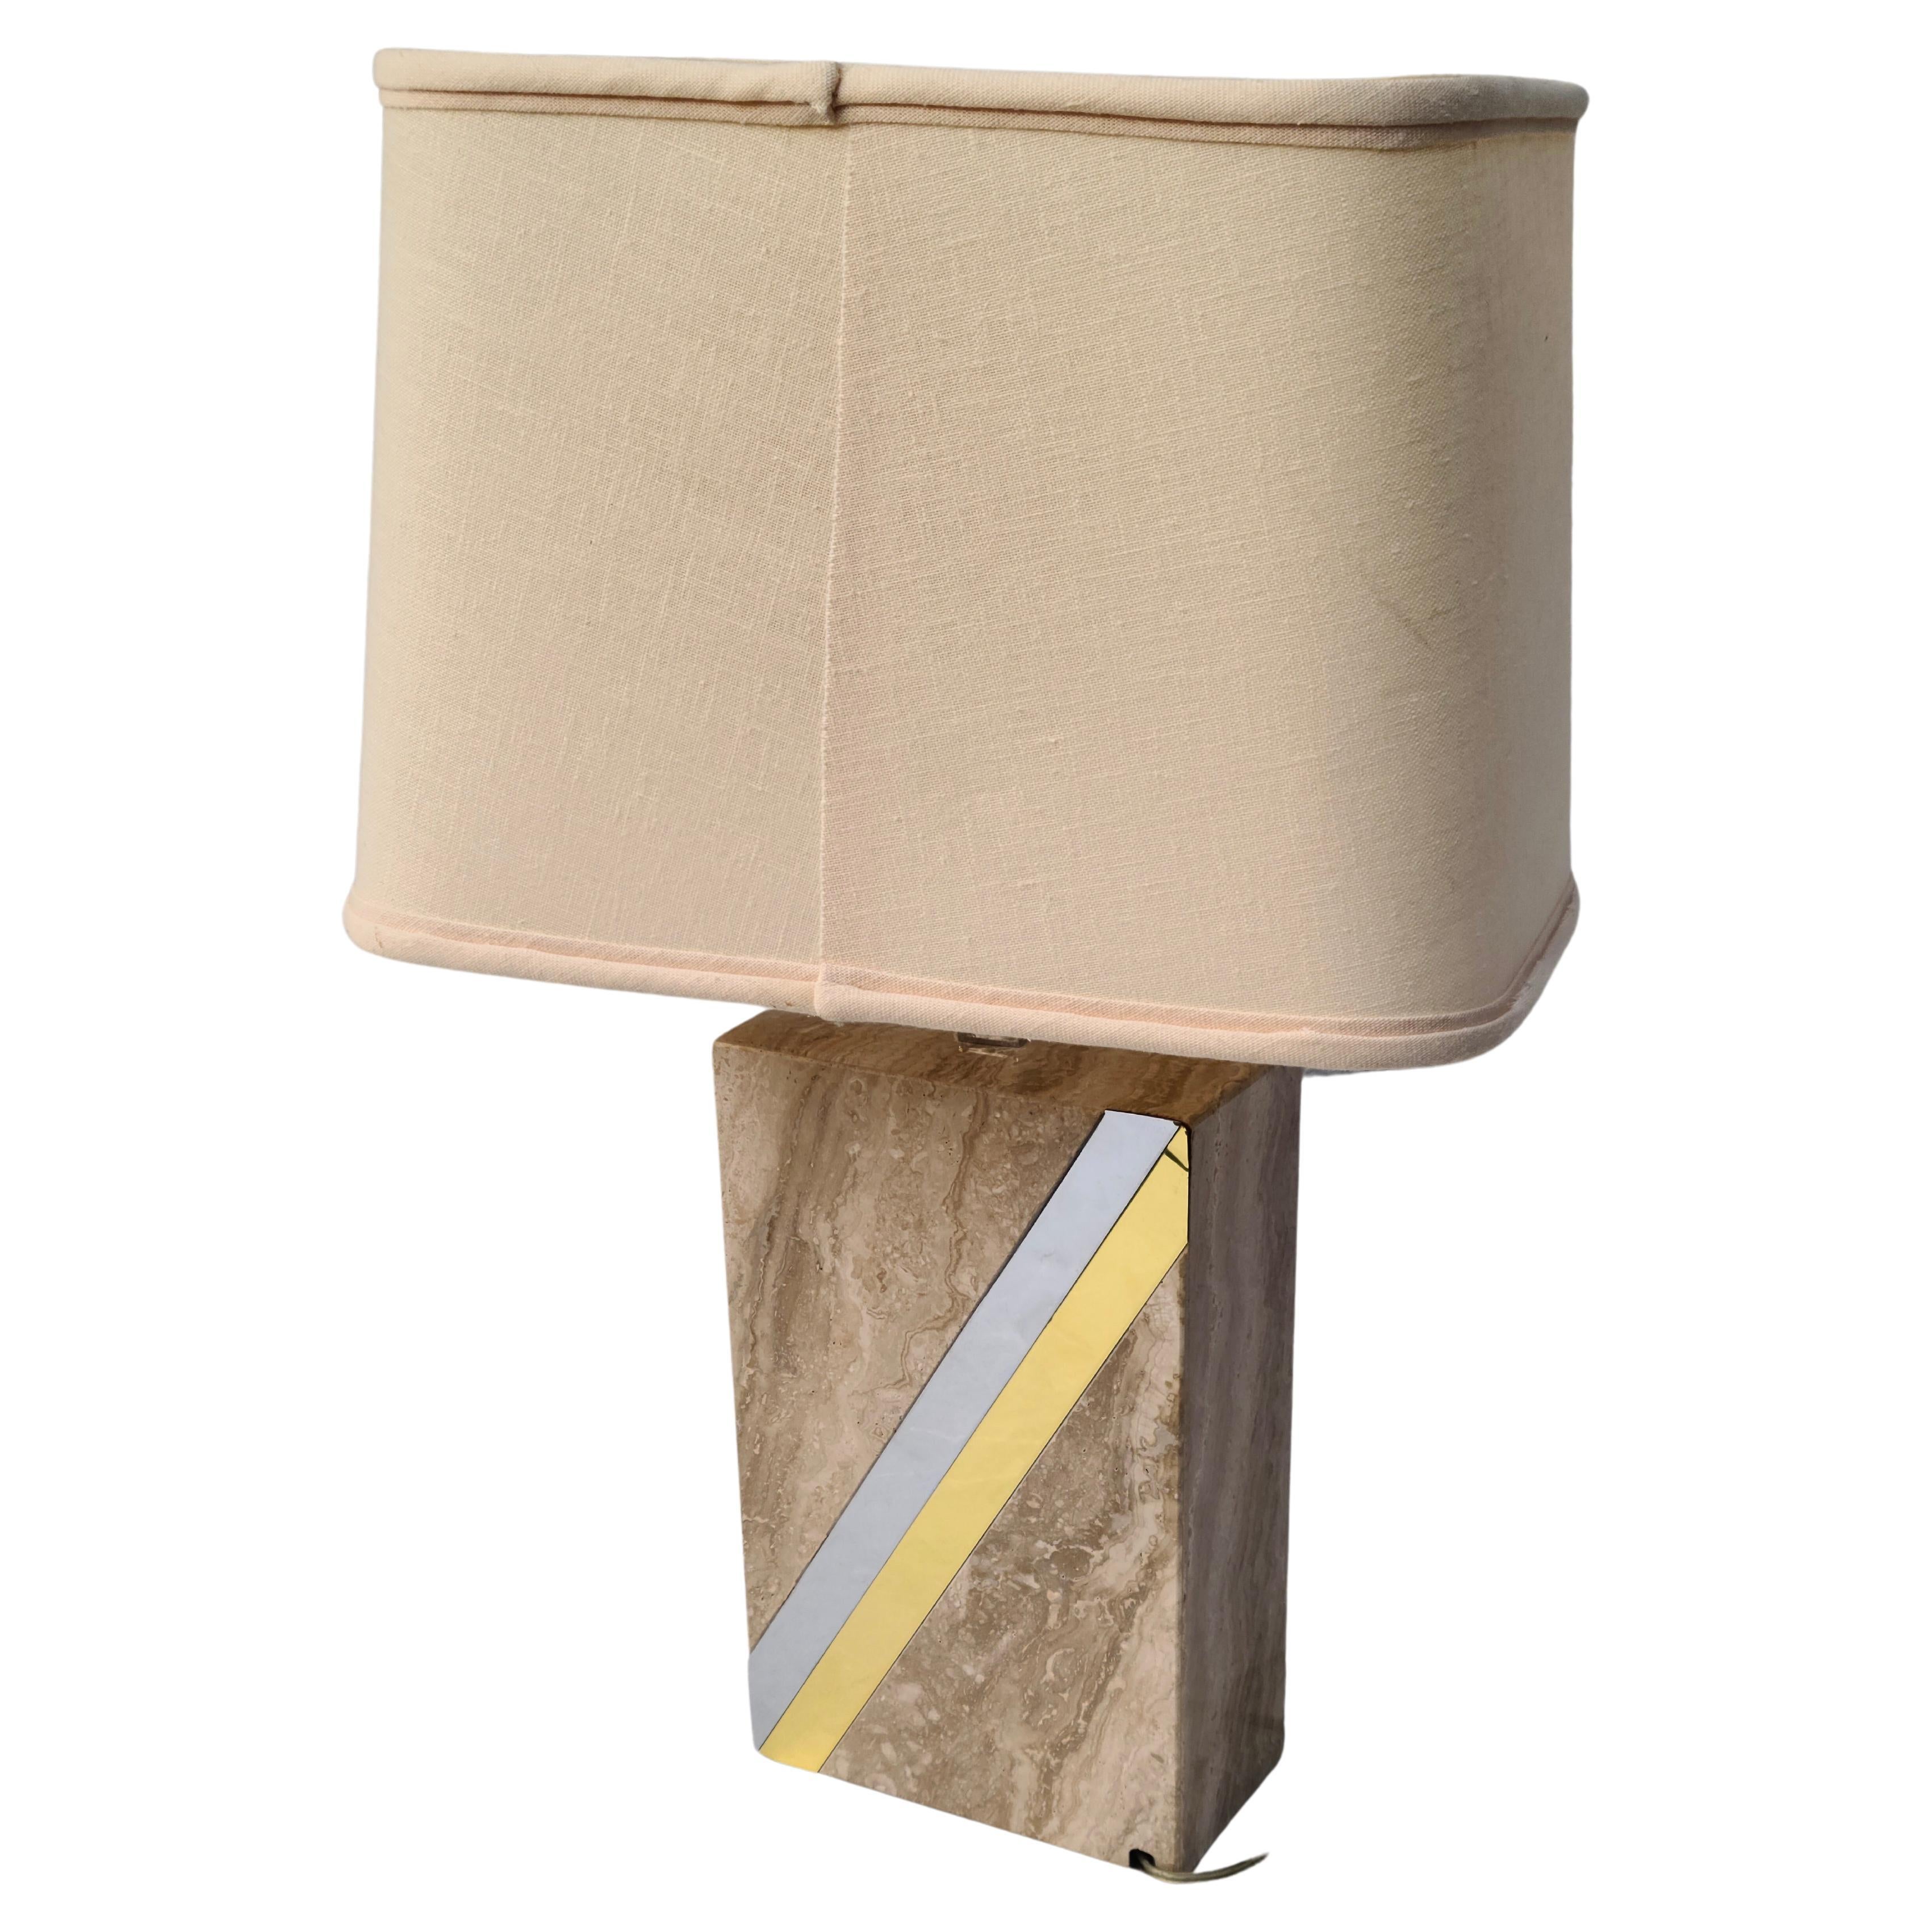 Table Lamp marked Raymor. 
Travertine base with brass and chrome applique.
Shade has some damage from use: Heat of bulb, etc. 